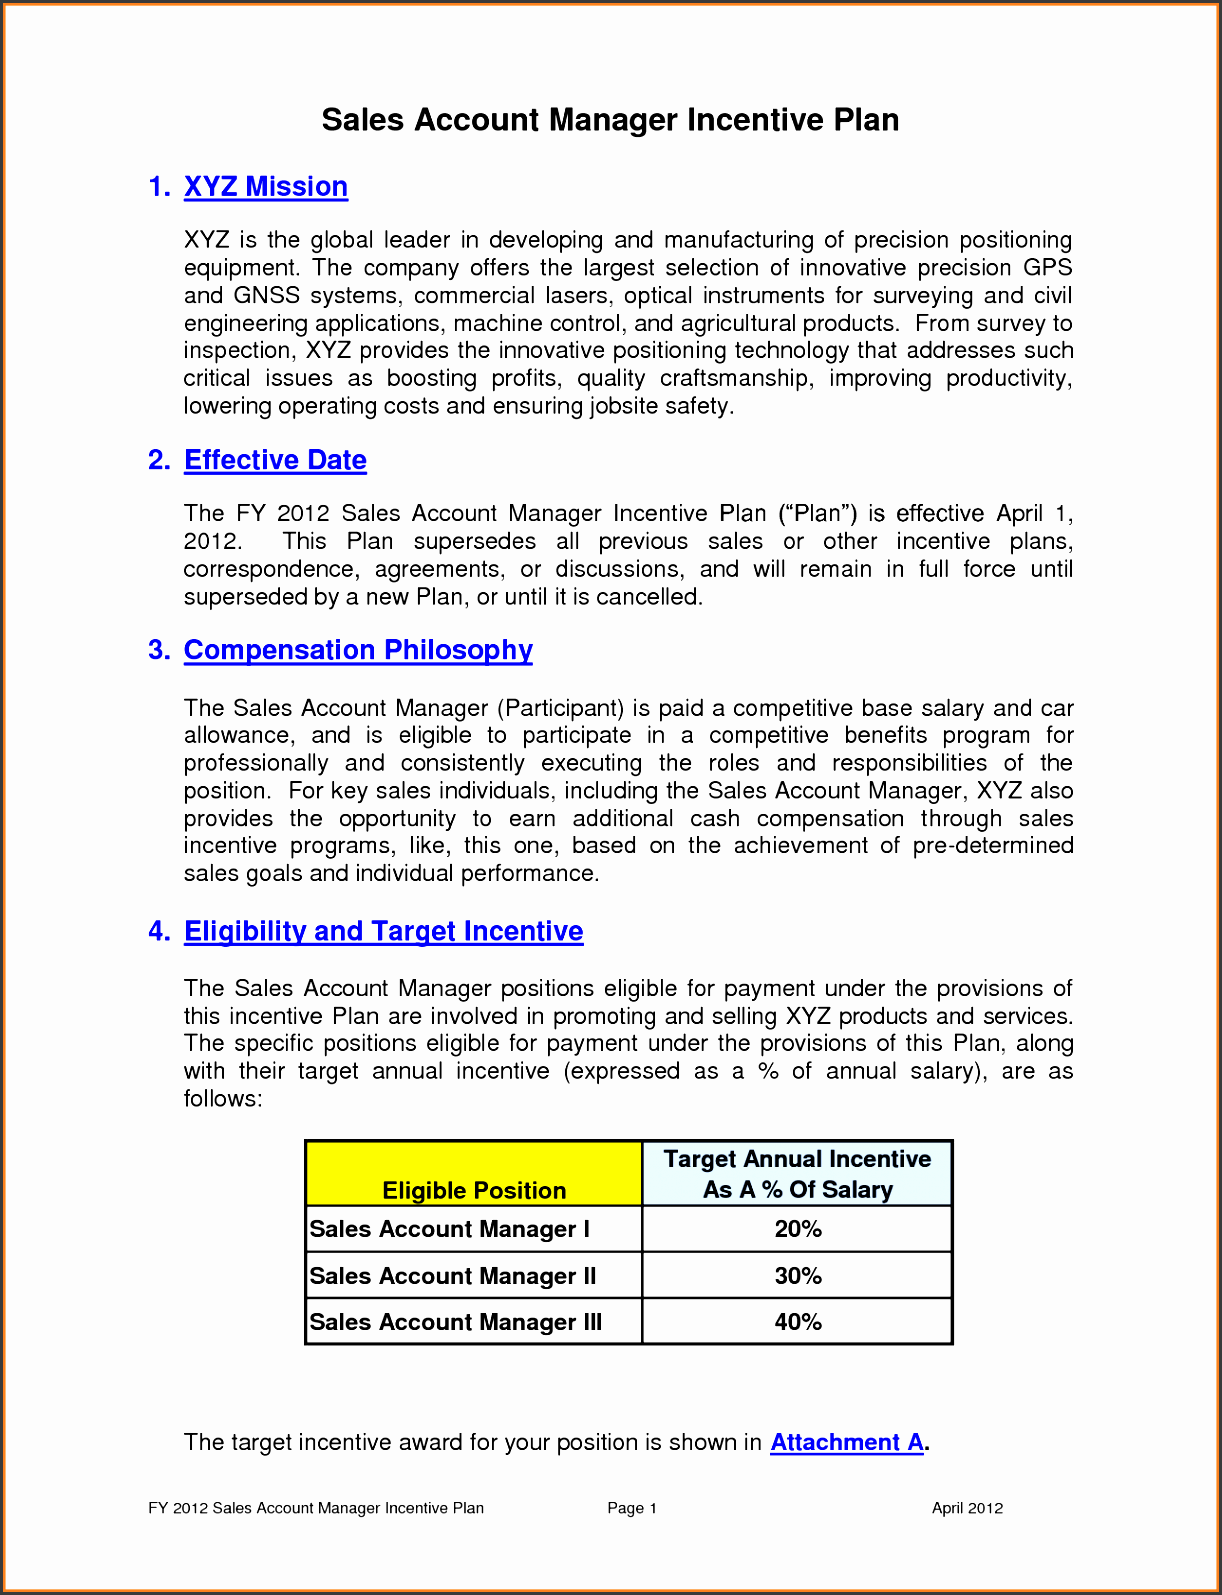 sales information package example format template